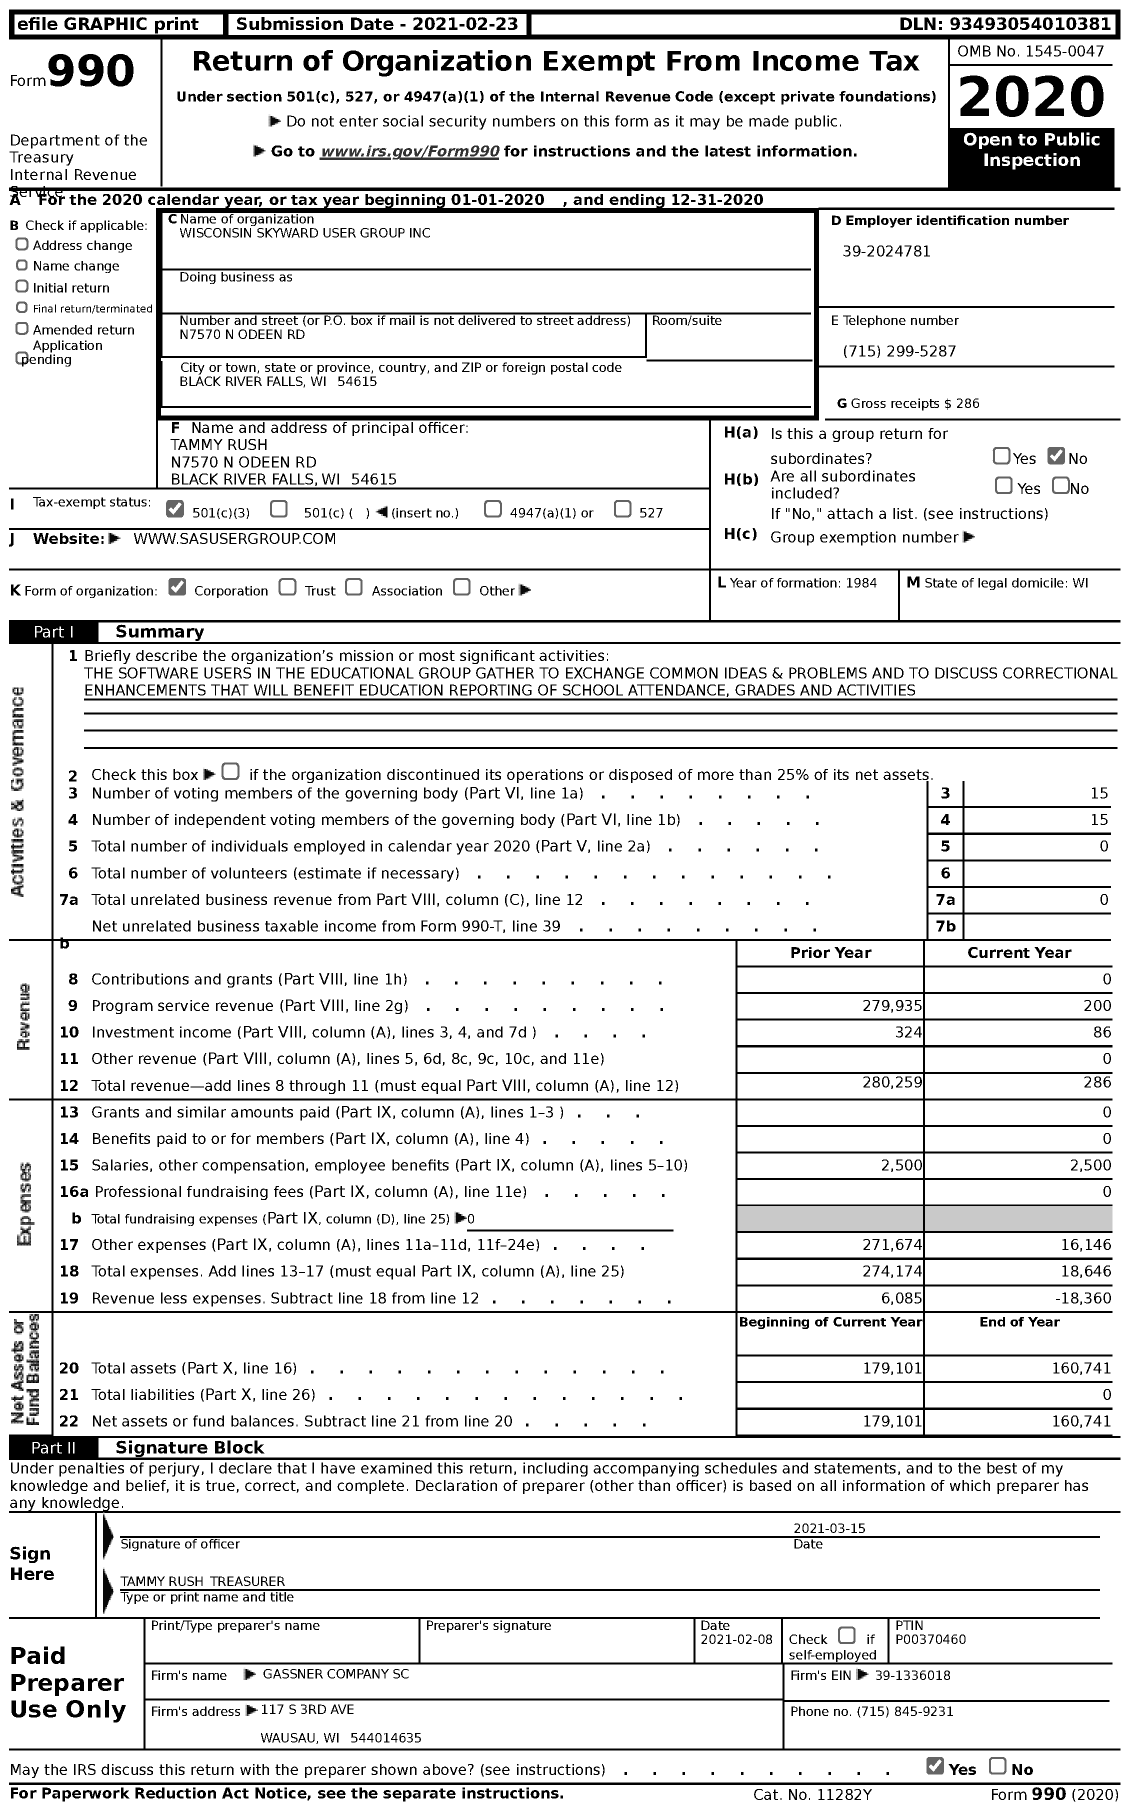 Image of first page of 2020 Form 990 for Wisconsin Skyward User Group